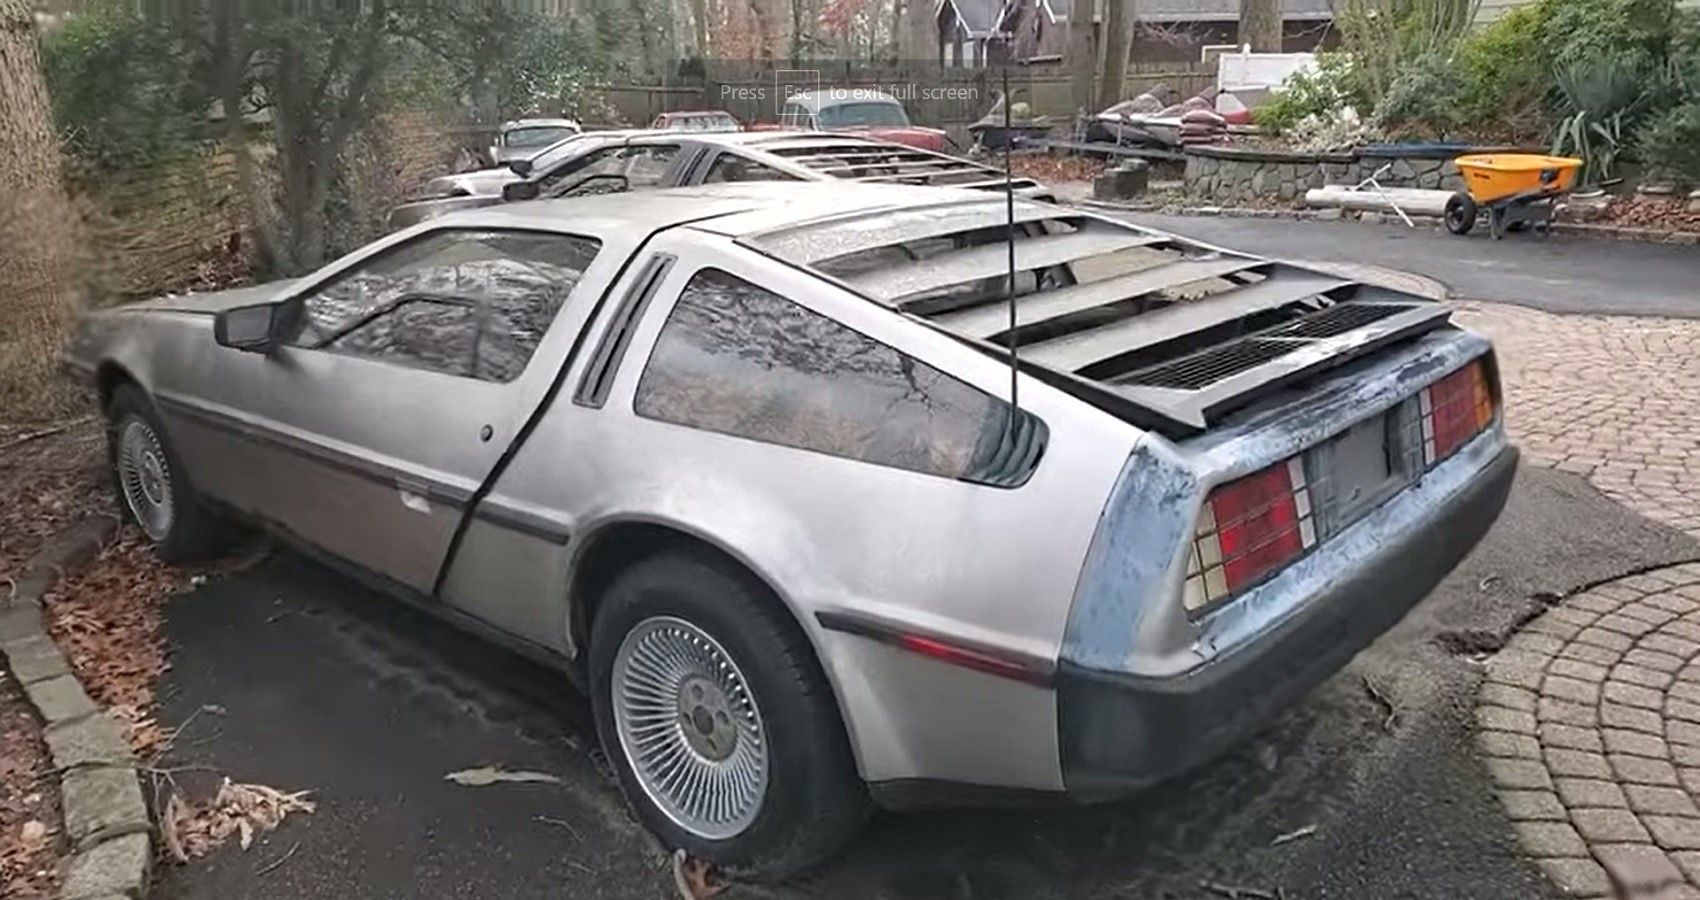 DeLorean DMC-12 and car collection, outside in lot